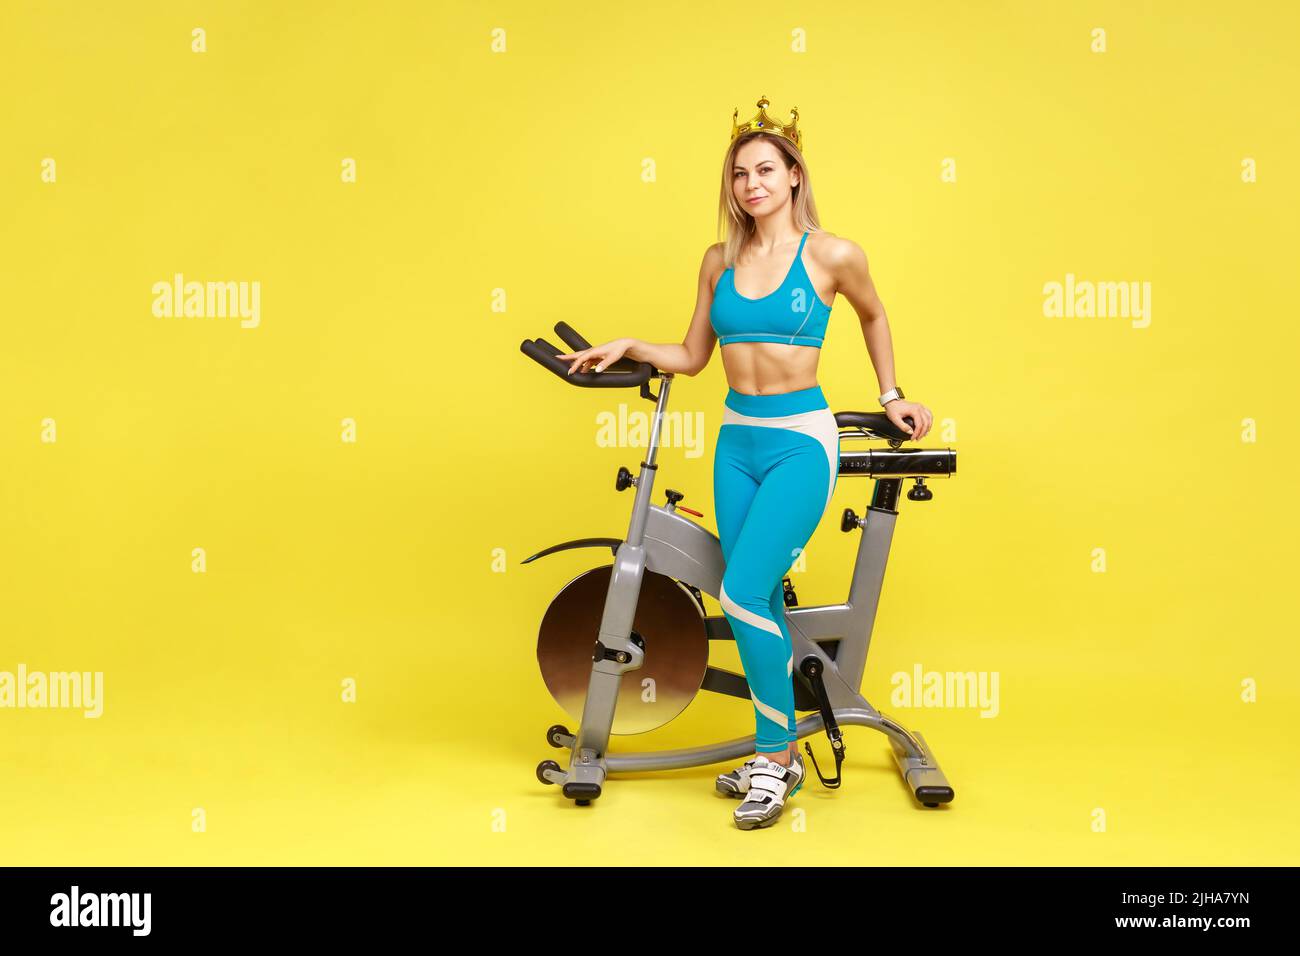 Full length portrait of confident slim woman standing near sport equipment with golden crown on her head, wearing blue sportswear. Indoor studio shot isolated on yellow background. Stock Photo